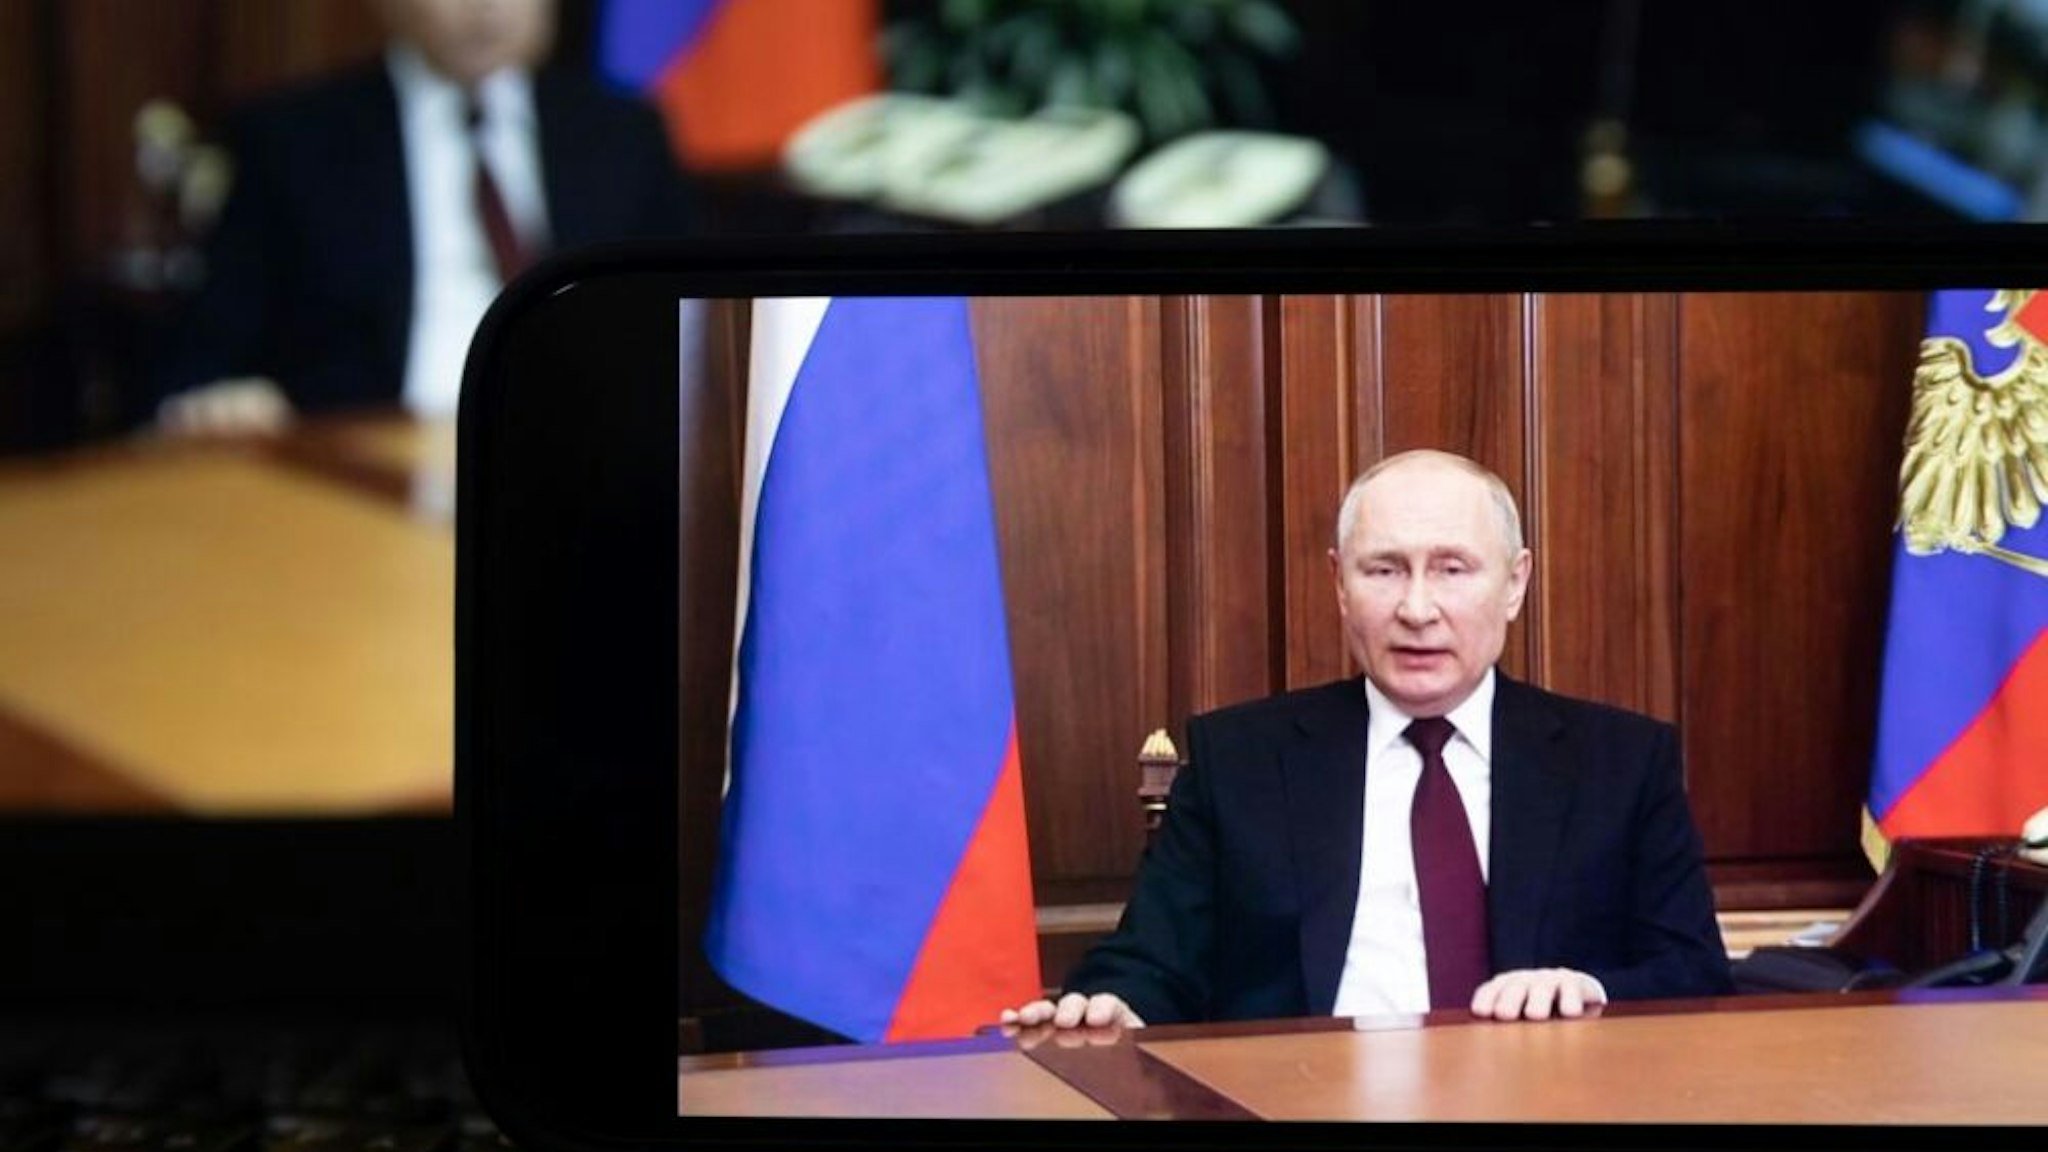 Photo taken on Feb. 21, 2022 shows a screen displaying Russian President Vladimir Putin speaking during a televised address to the nation in Moscow, Russia. Russian President Vladimir Putin announced on Monday that he has signed a decree recognizing "the Lugansk People's Republic LPR" and "the Donetsk People's Republic DPR" as independent and sovereign states.